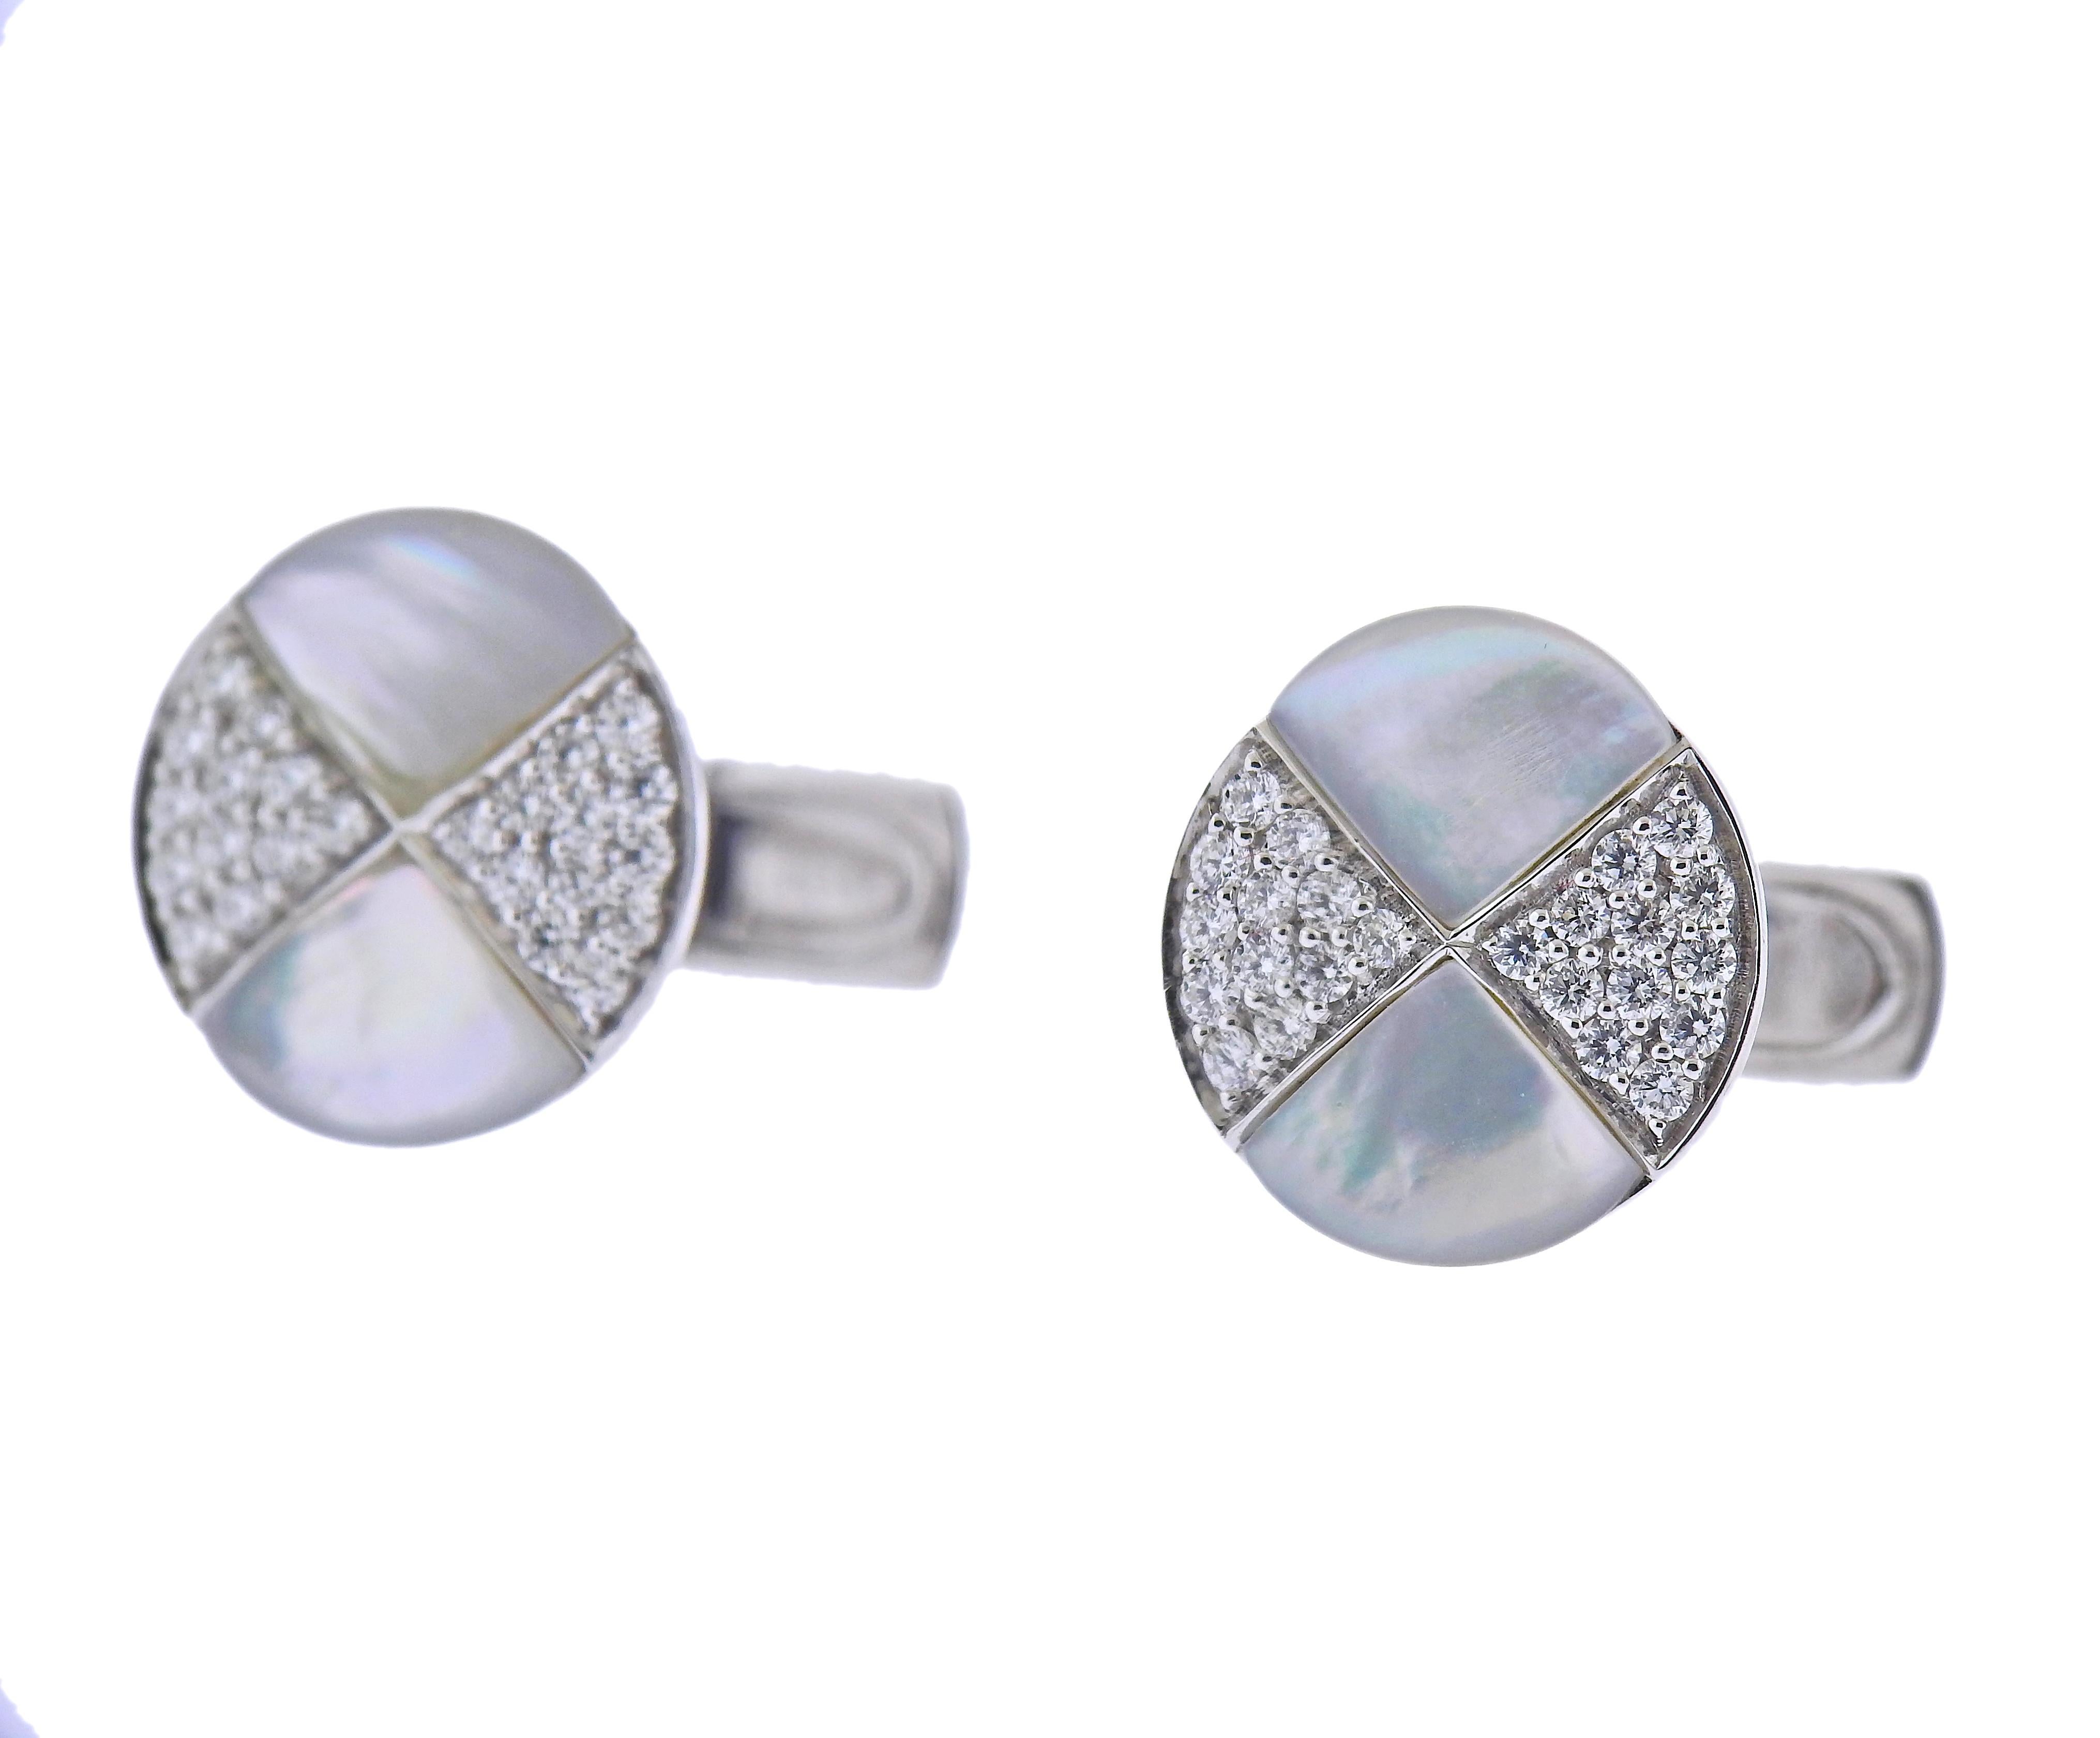 14k White Gold cufflinks. Set with 0.69ctw in SI F/G diamonds and Mother of Pearl. Cufflinks measure 14.5mm x 15mm. Marked - Eravos, 14k. Weight - 8 grams. 
